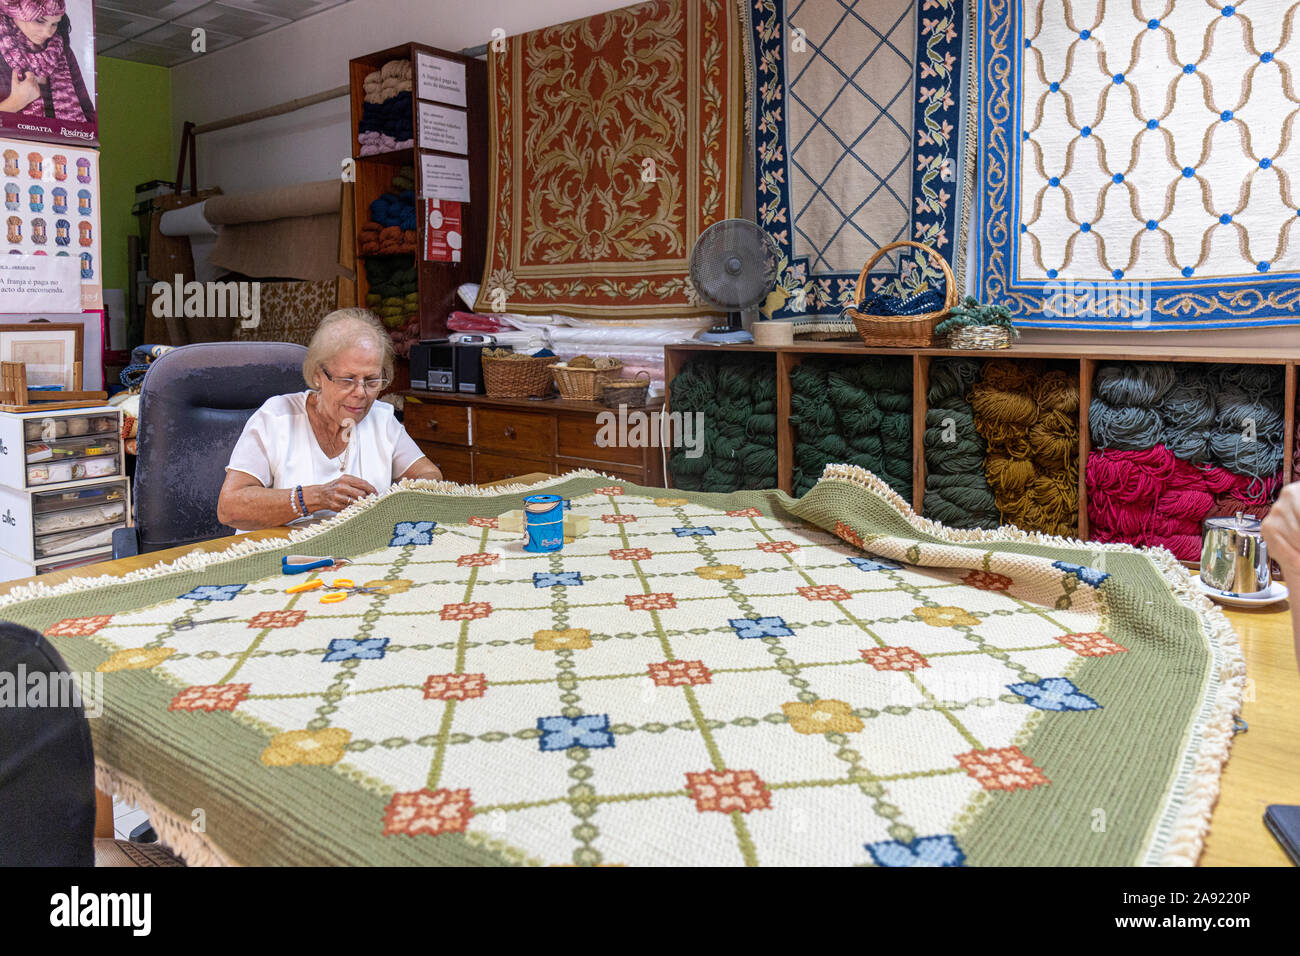 Carpet Restoration.  The University Town of Coimbra, Portugal.  One of a few remaining specialists restores an antique carpet Stock Photo